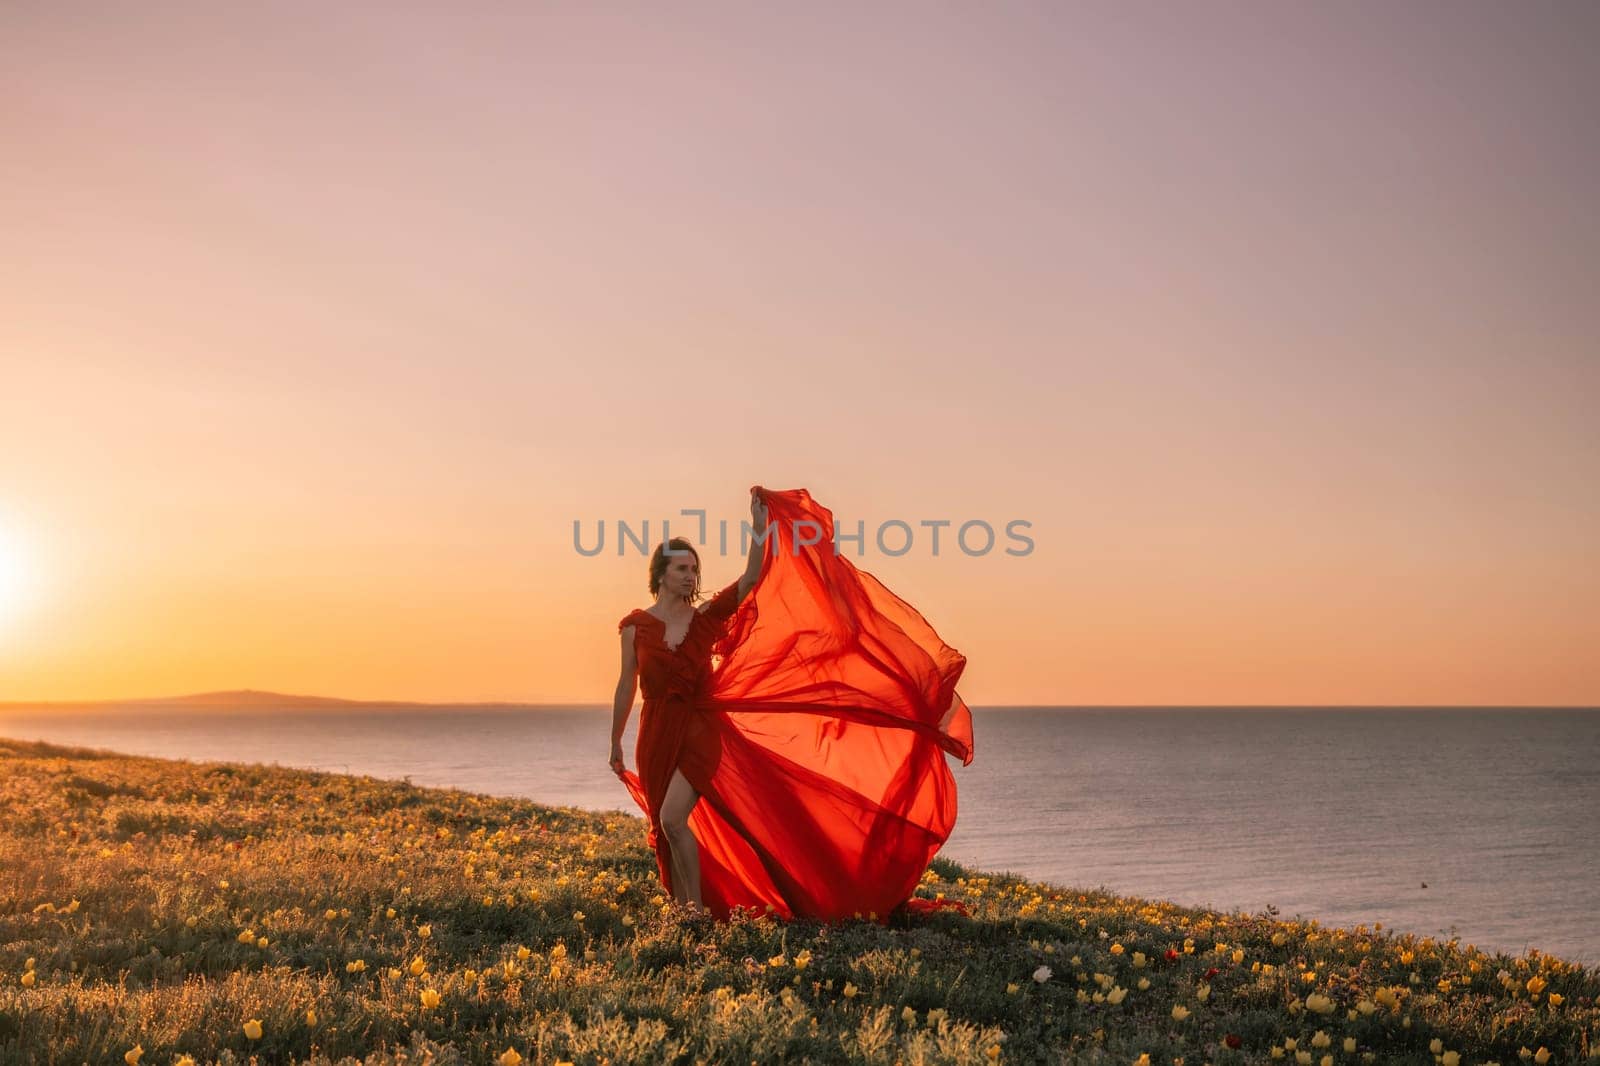 A woman in a red dress is standing on a grassy hill overlooking the ocean. The sky is a beautiful mix of orange and pink hues, creating a serene and romantic atmosphere